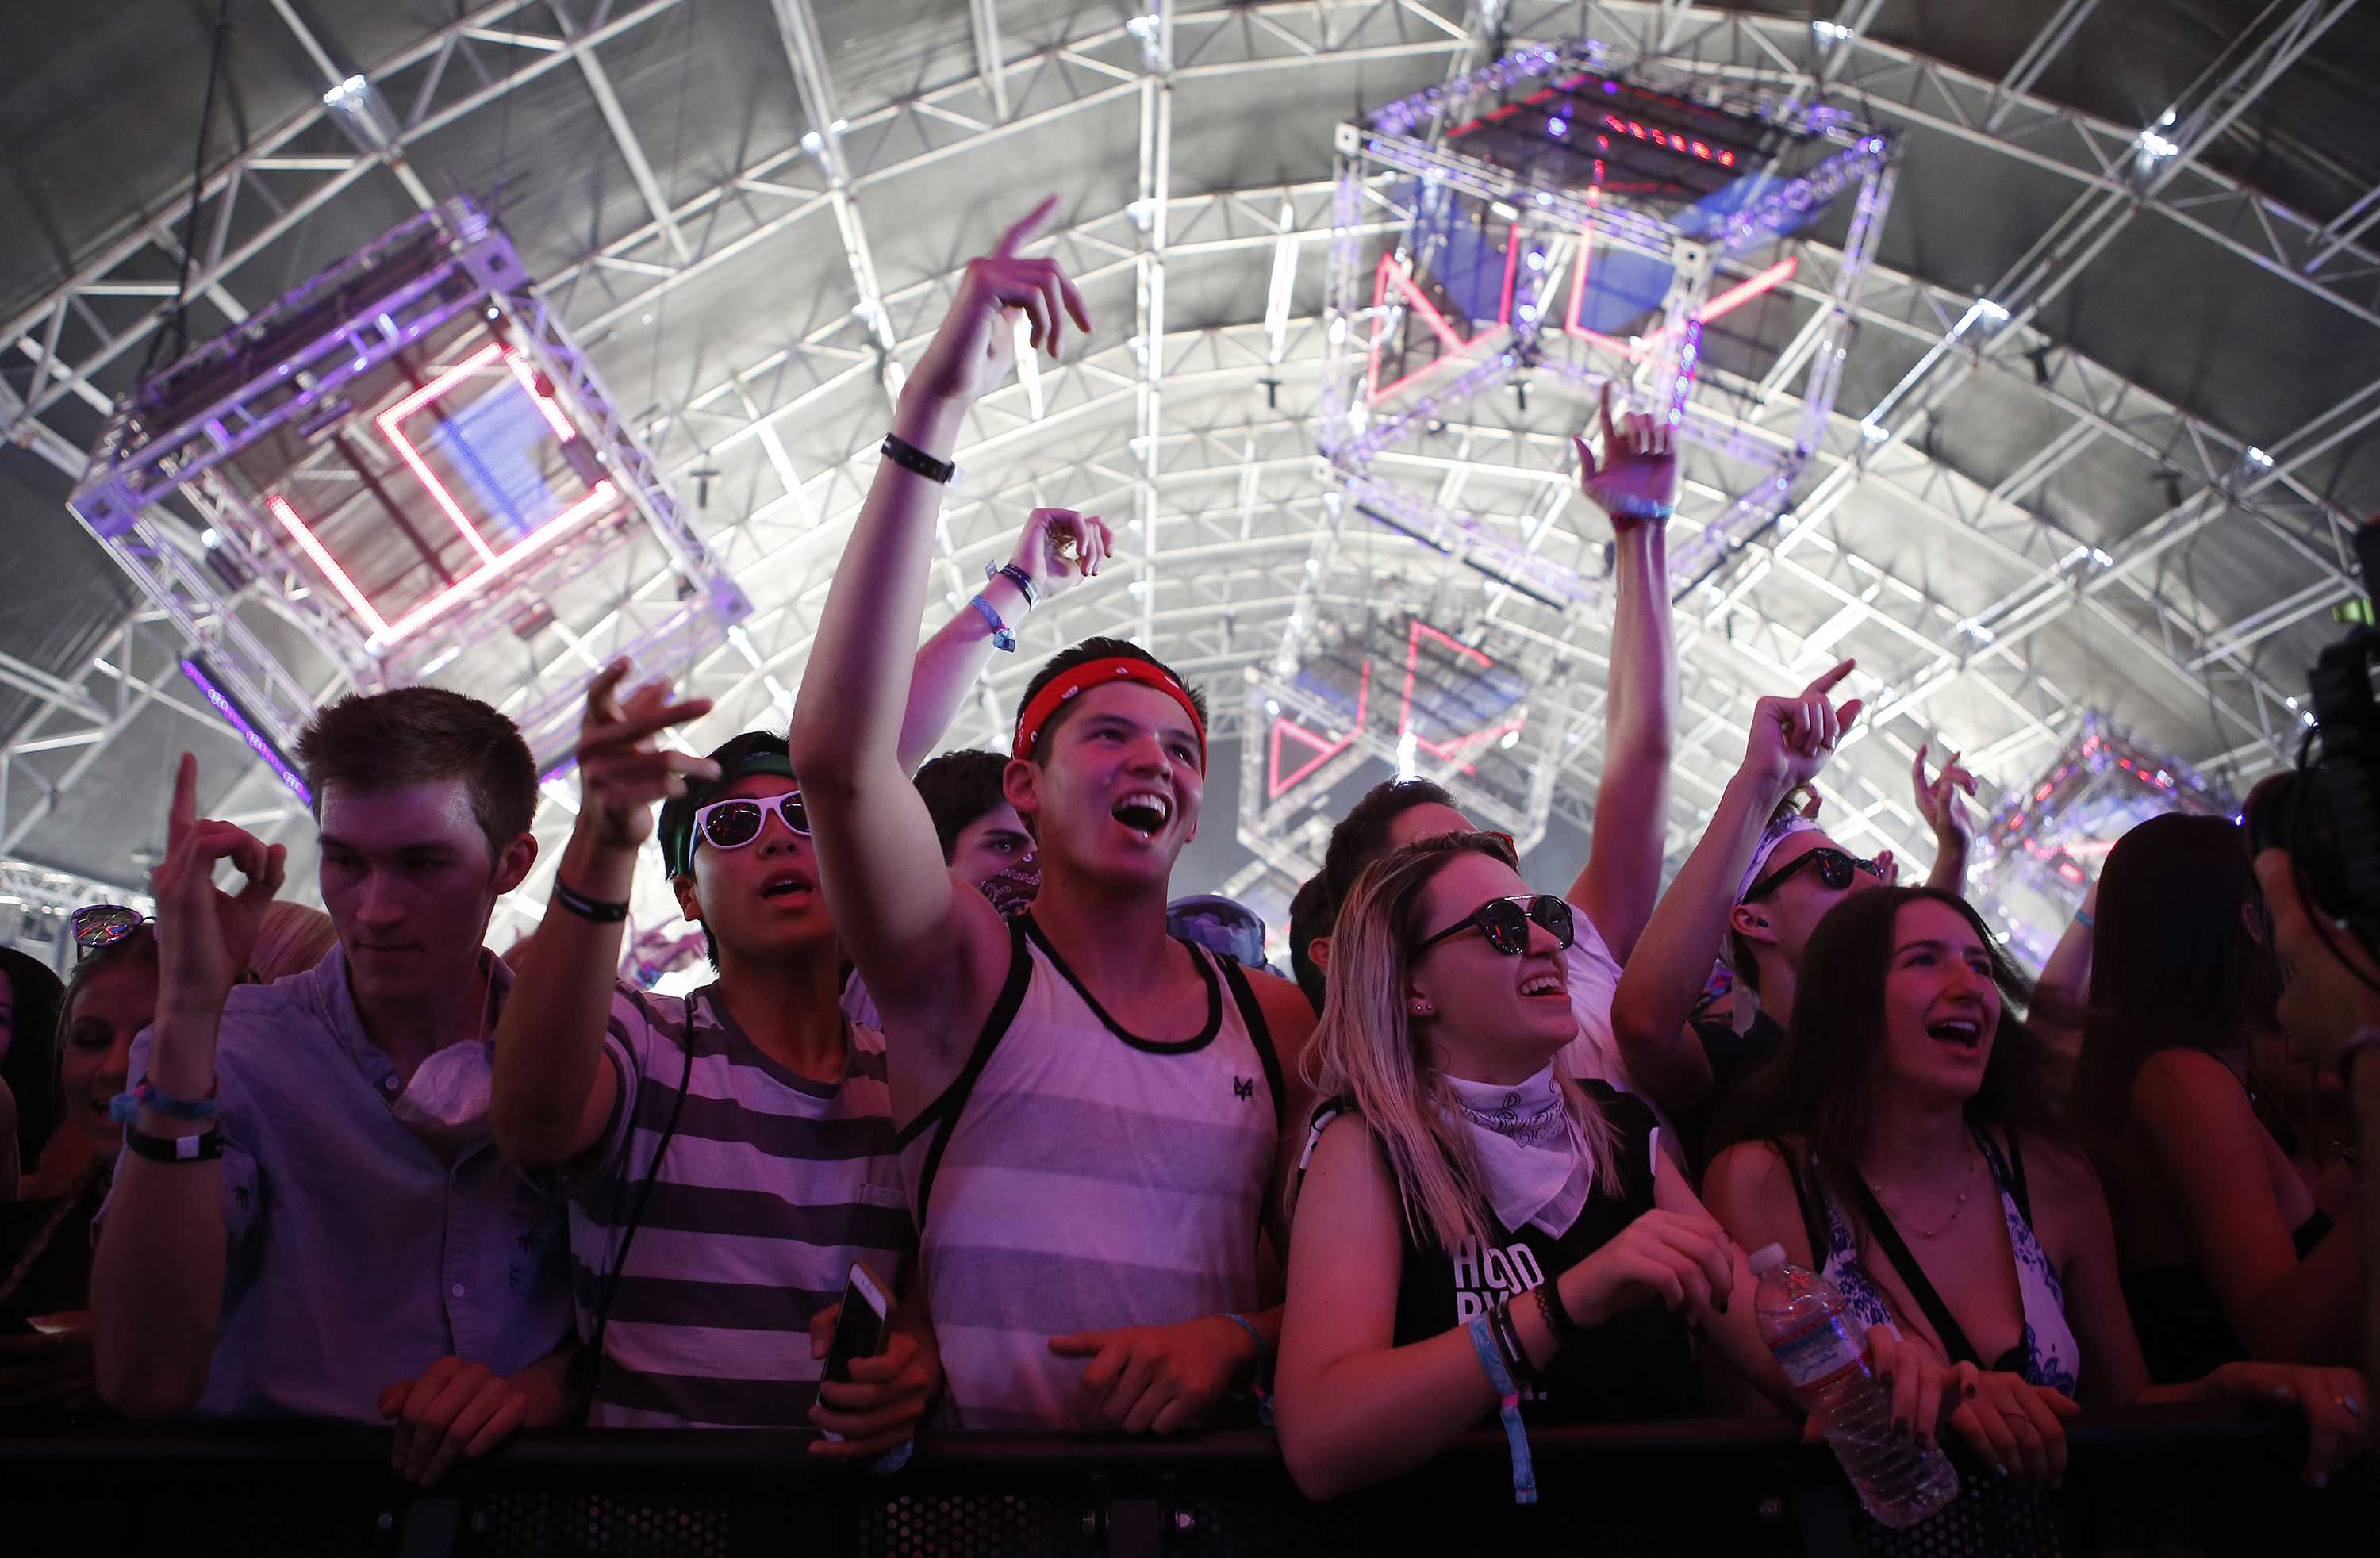 Crowd cheers for performers at Coachella